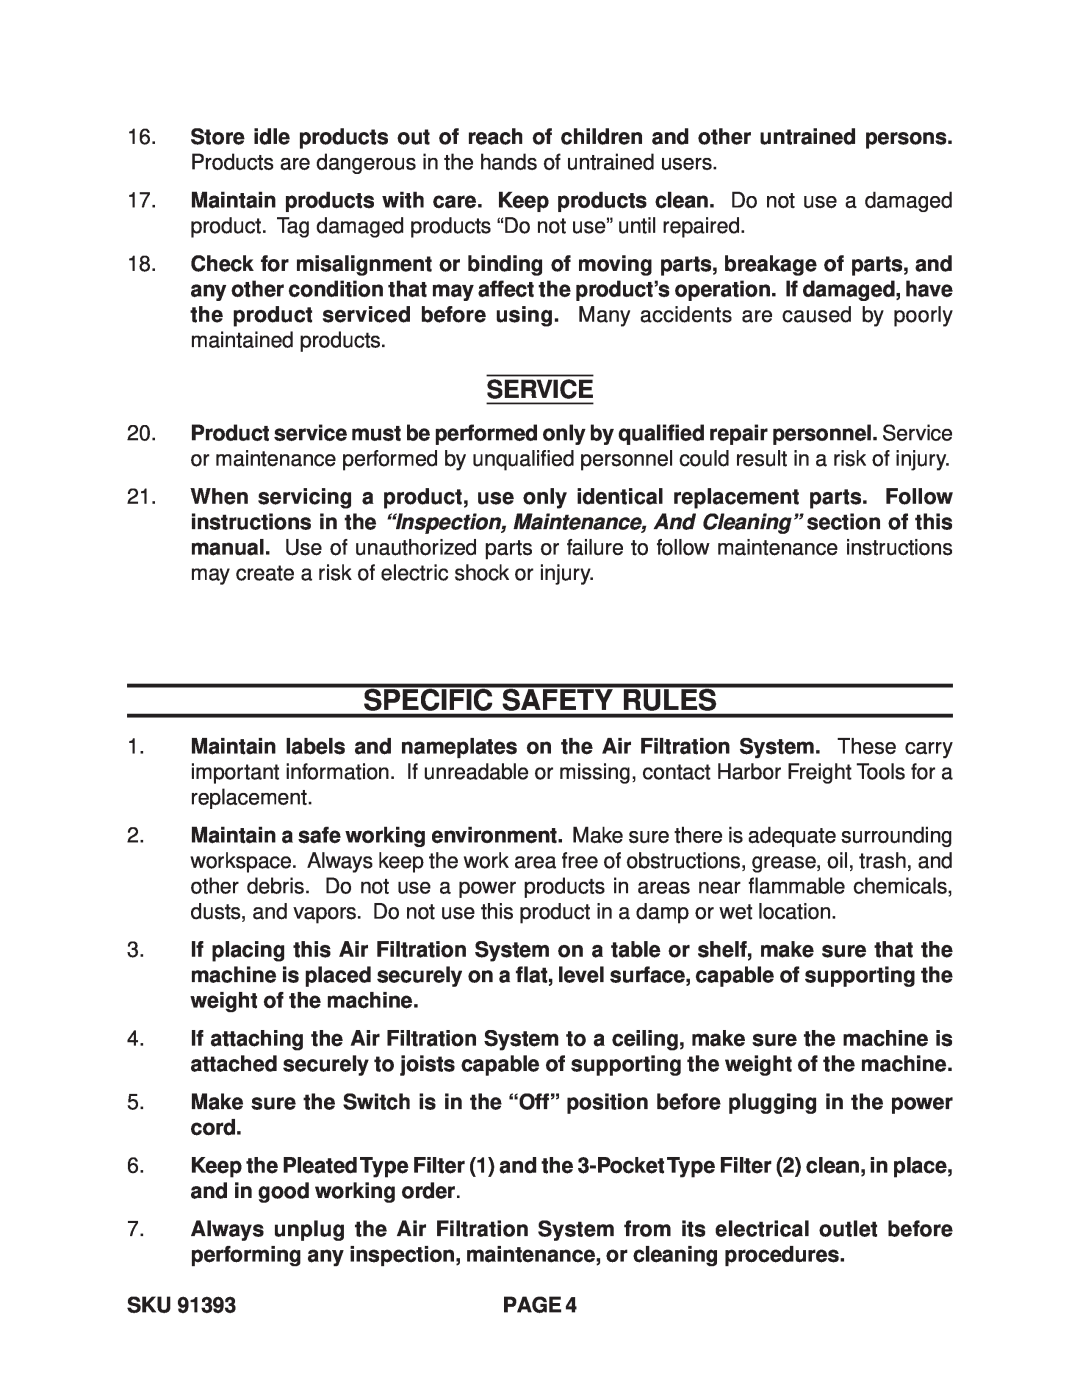 Harbor Freight Tools 91393 manual Specific Safety Rules, Service 